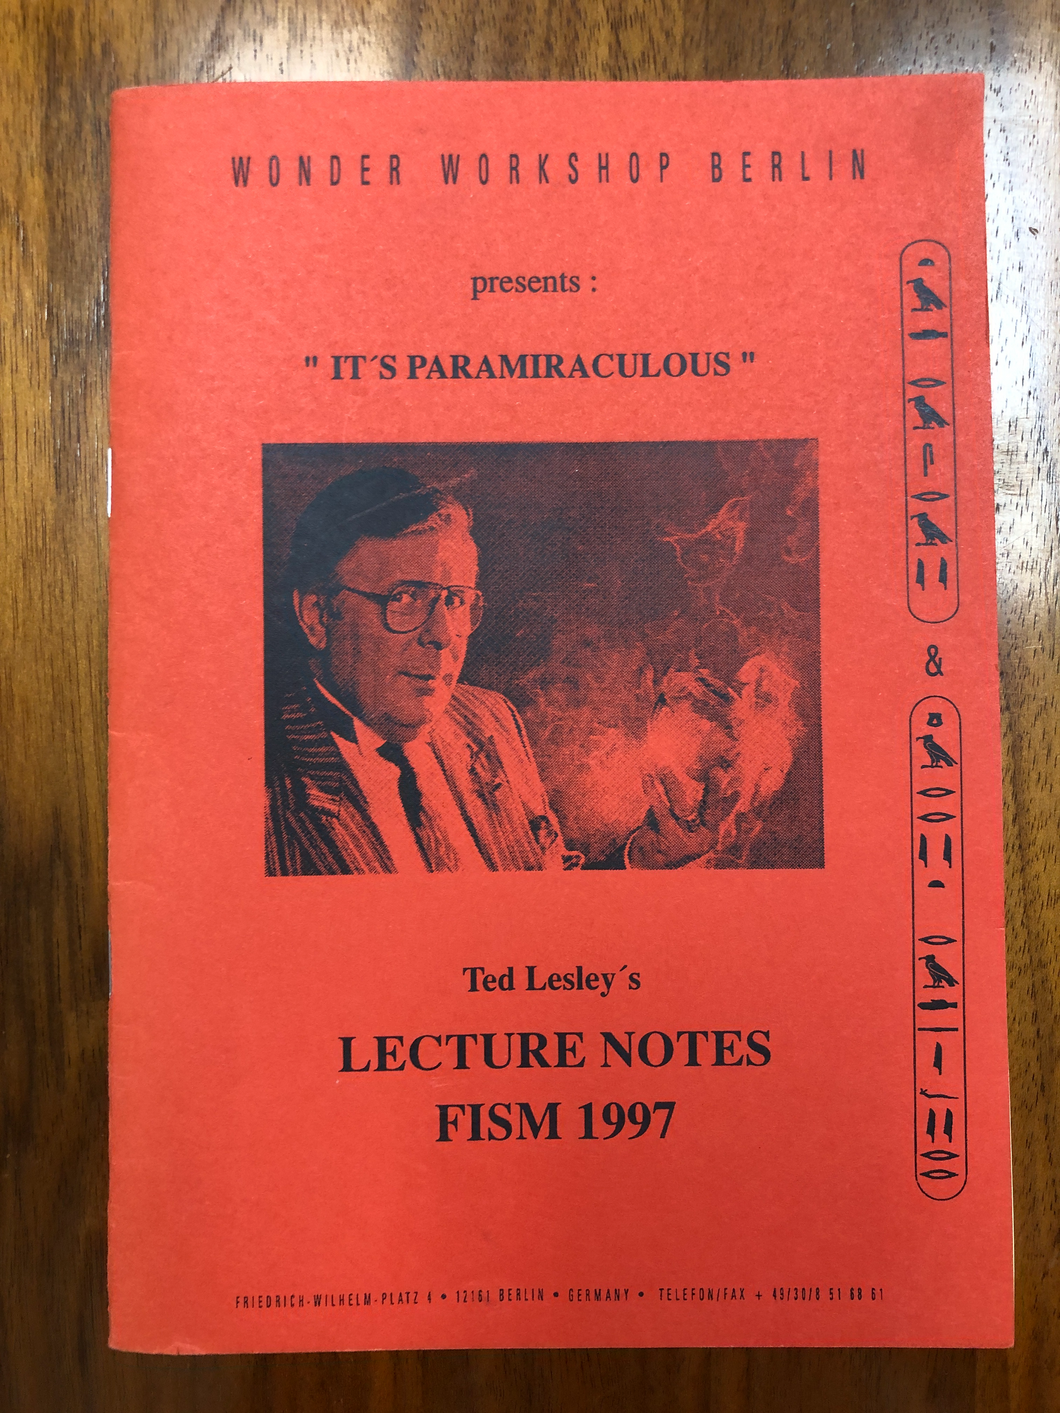 Ted Lesleys's Lecture Notes FISM 1997